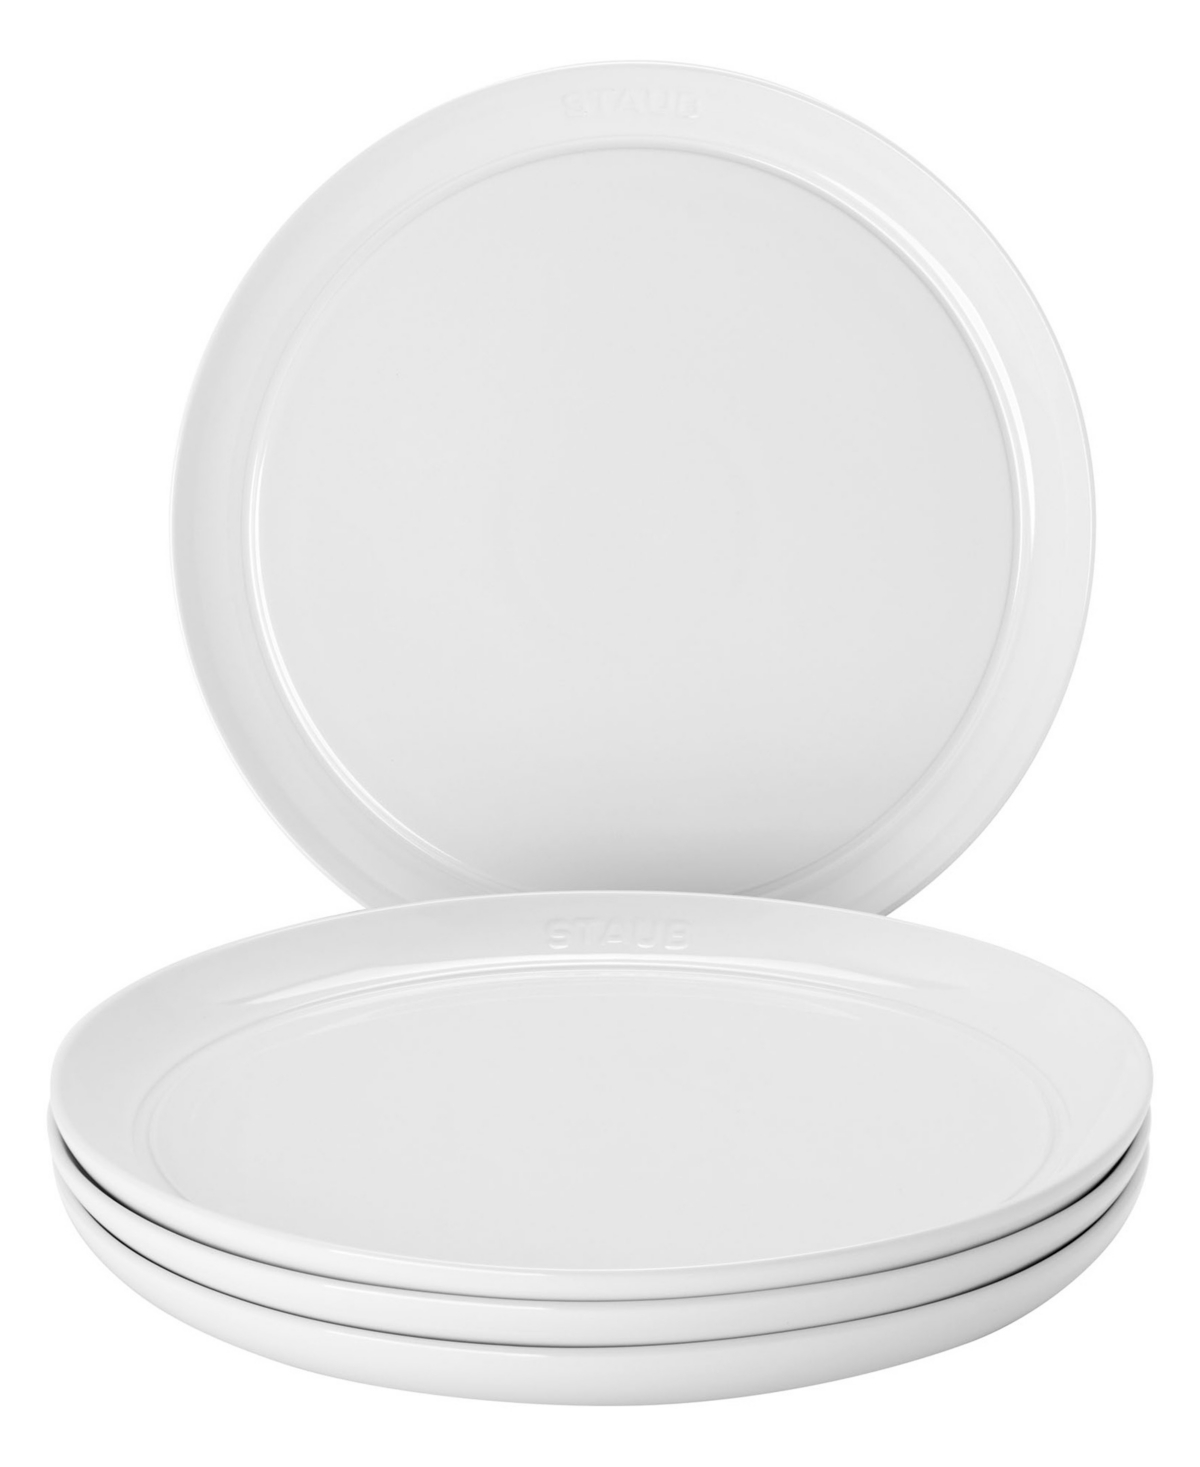 4 Piece 10.2" Dinner Plate Set, Service for 4 - White